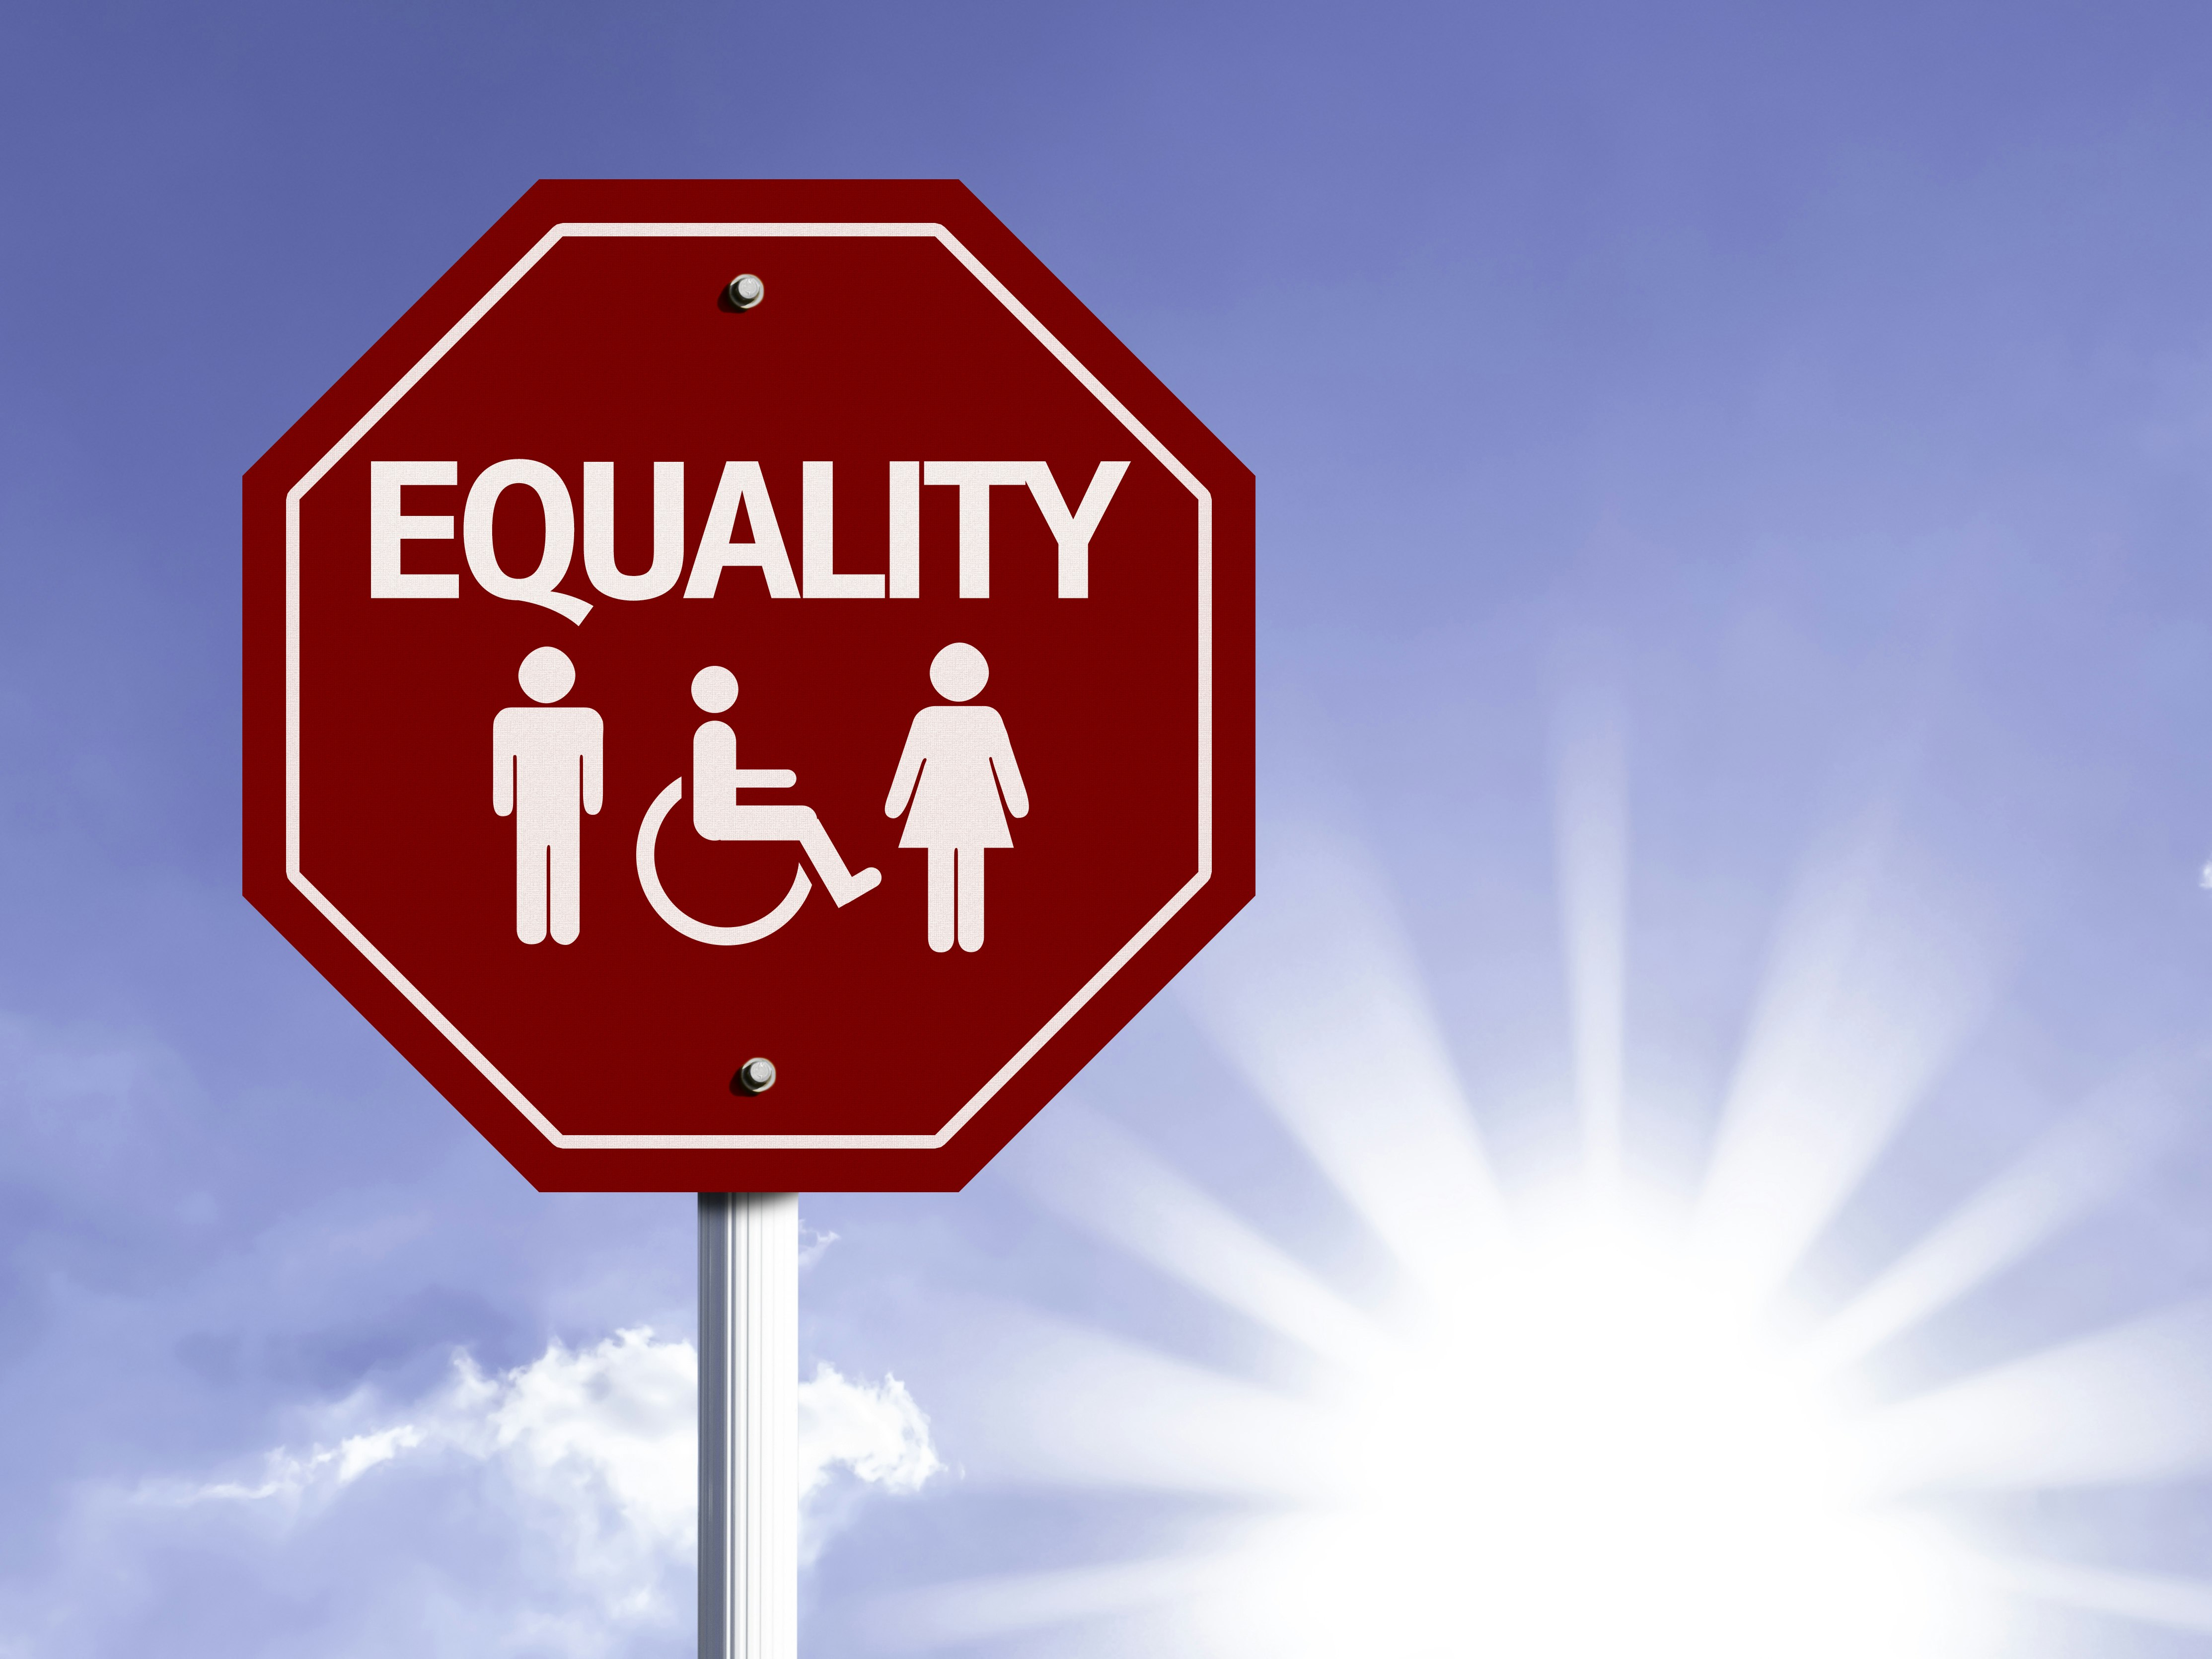 Although Australia has come a long way in disability rights, there&#8217;s still a long road ahead [Source: Shutterstock]
